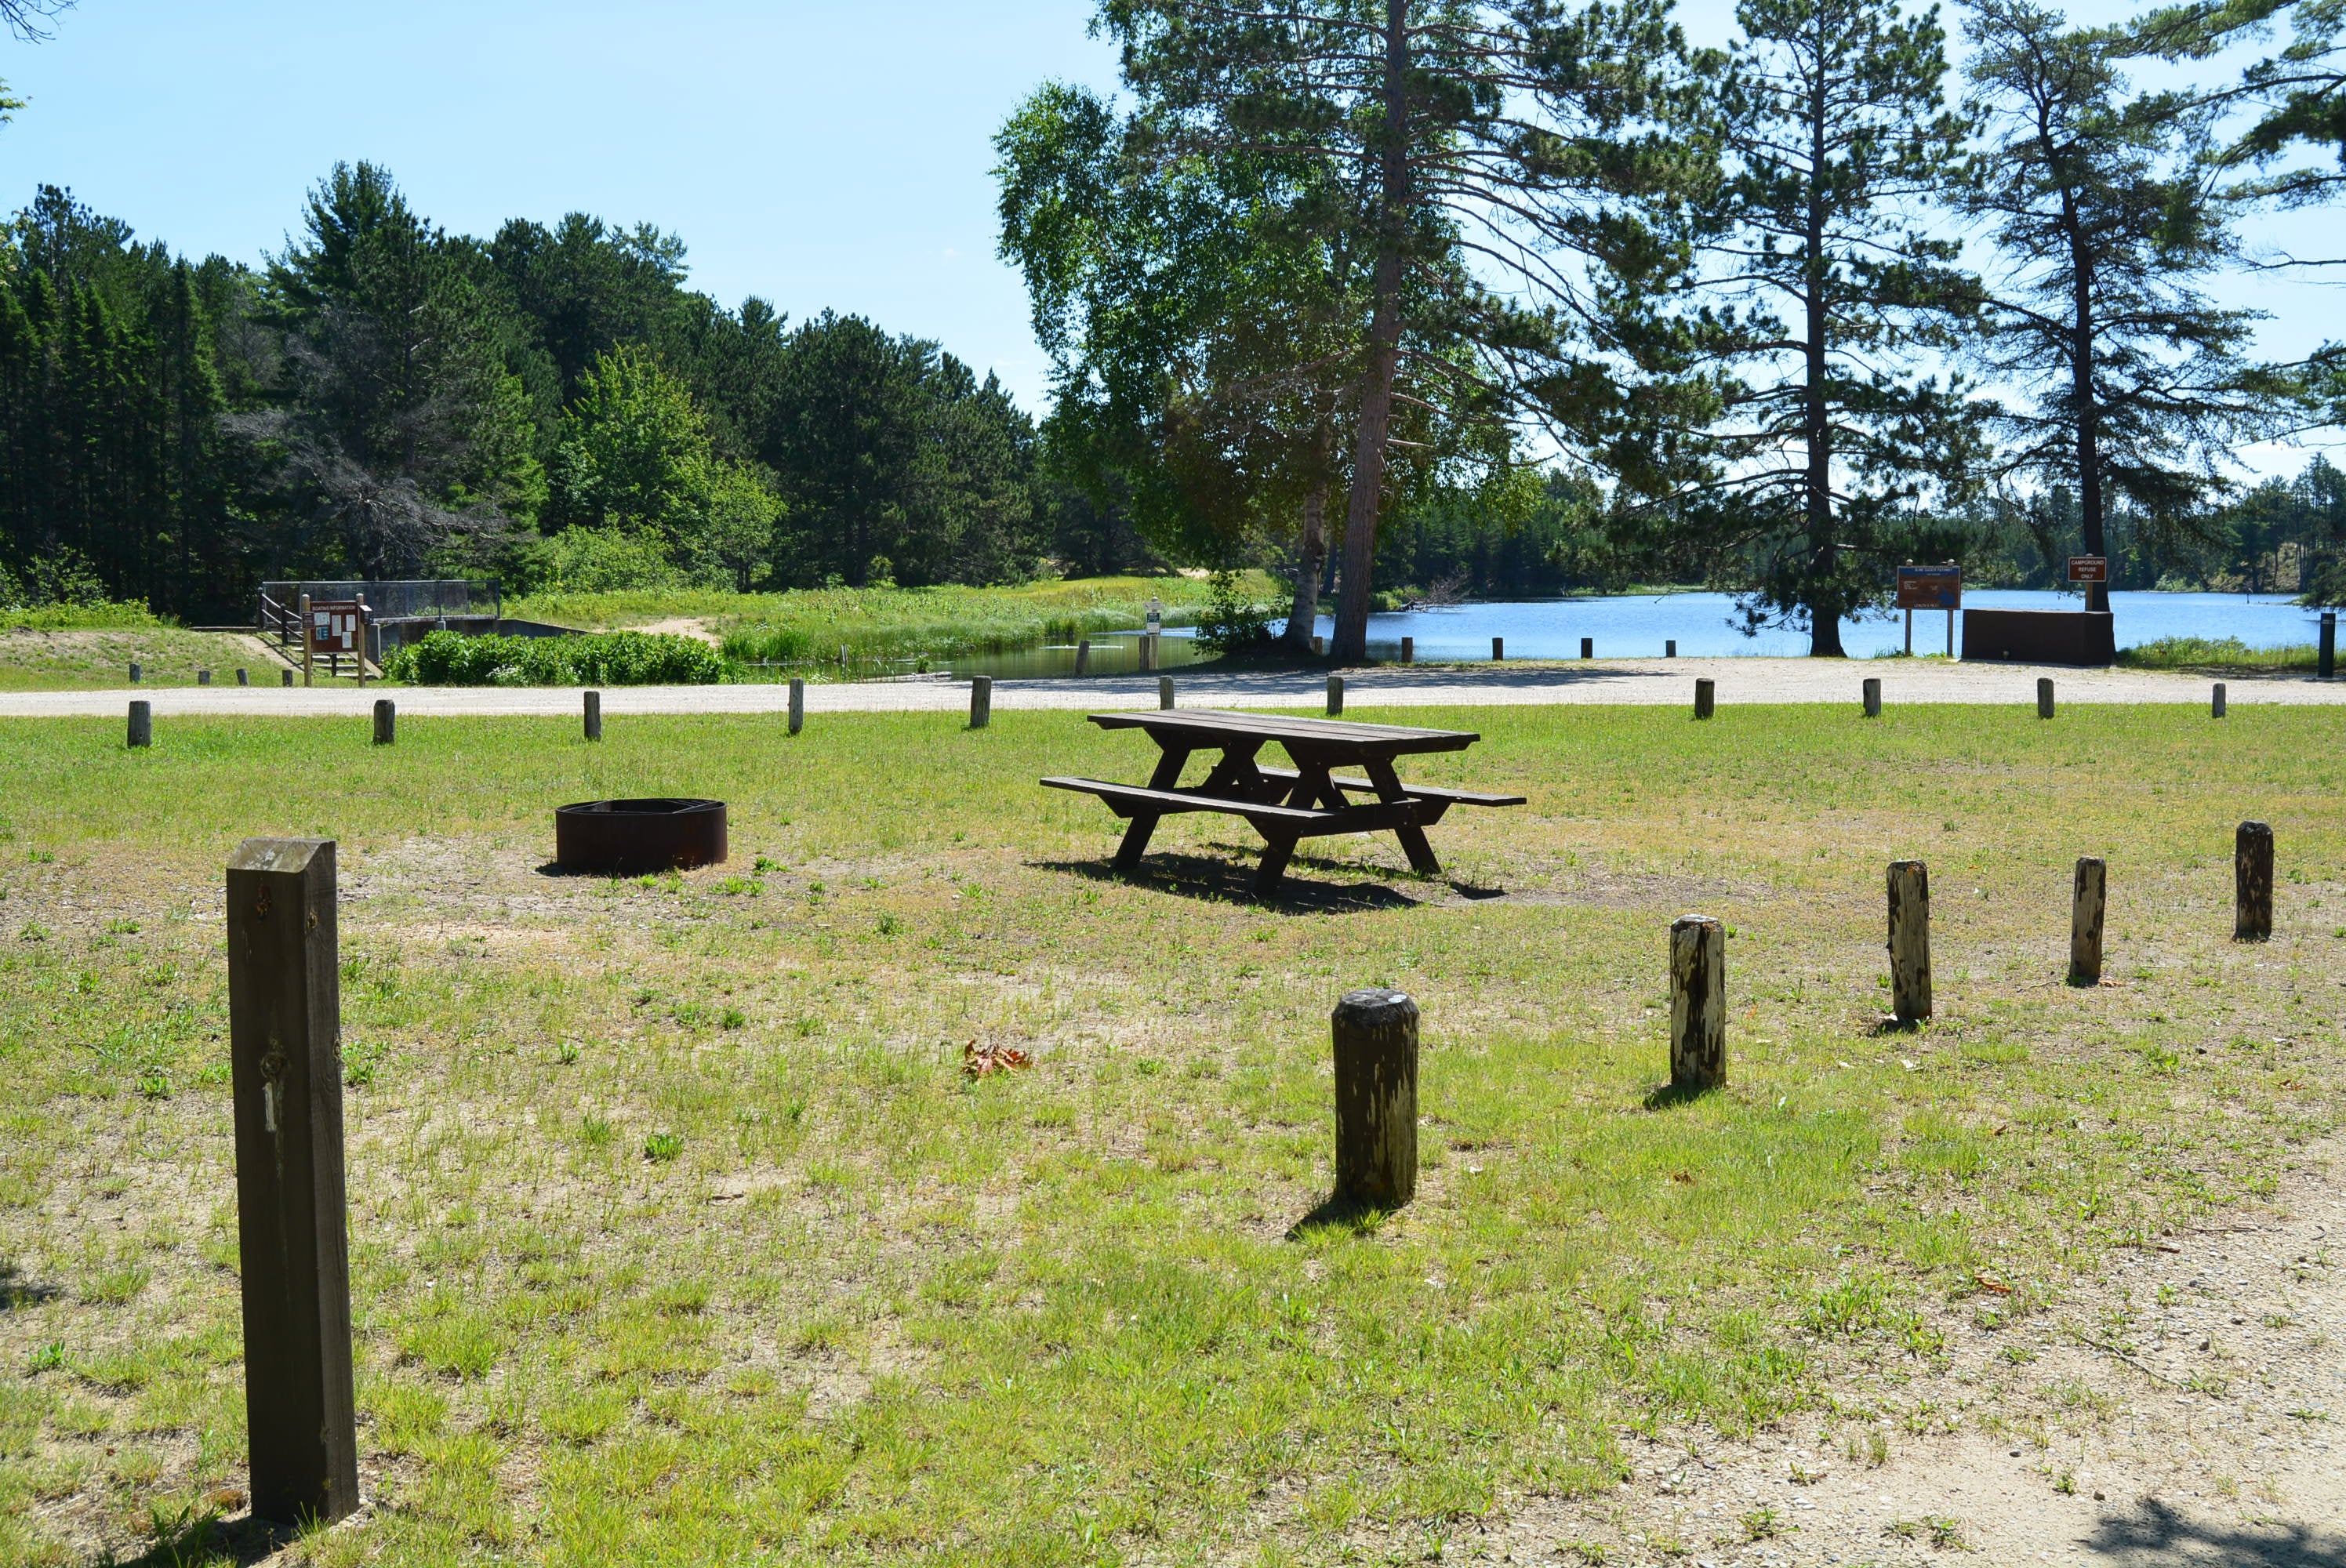 All sites have picnic table and fire pits.